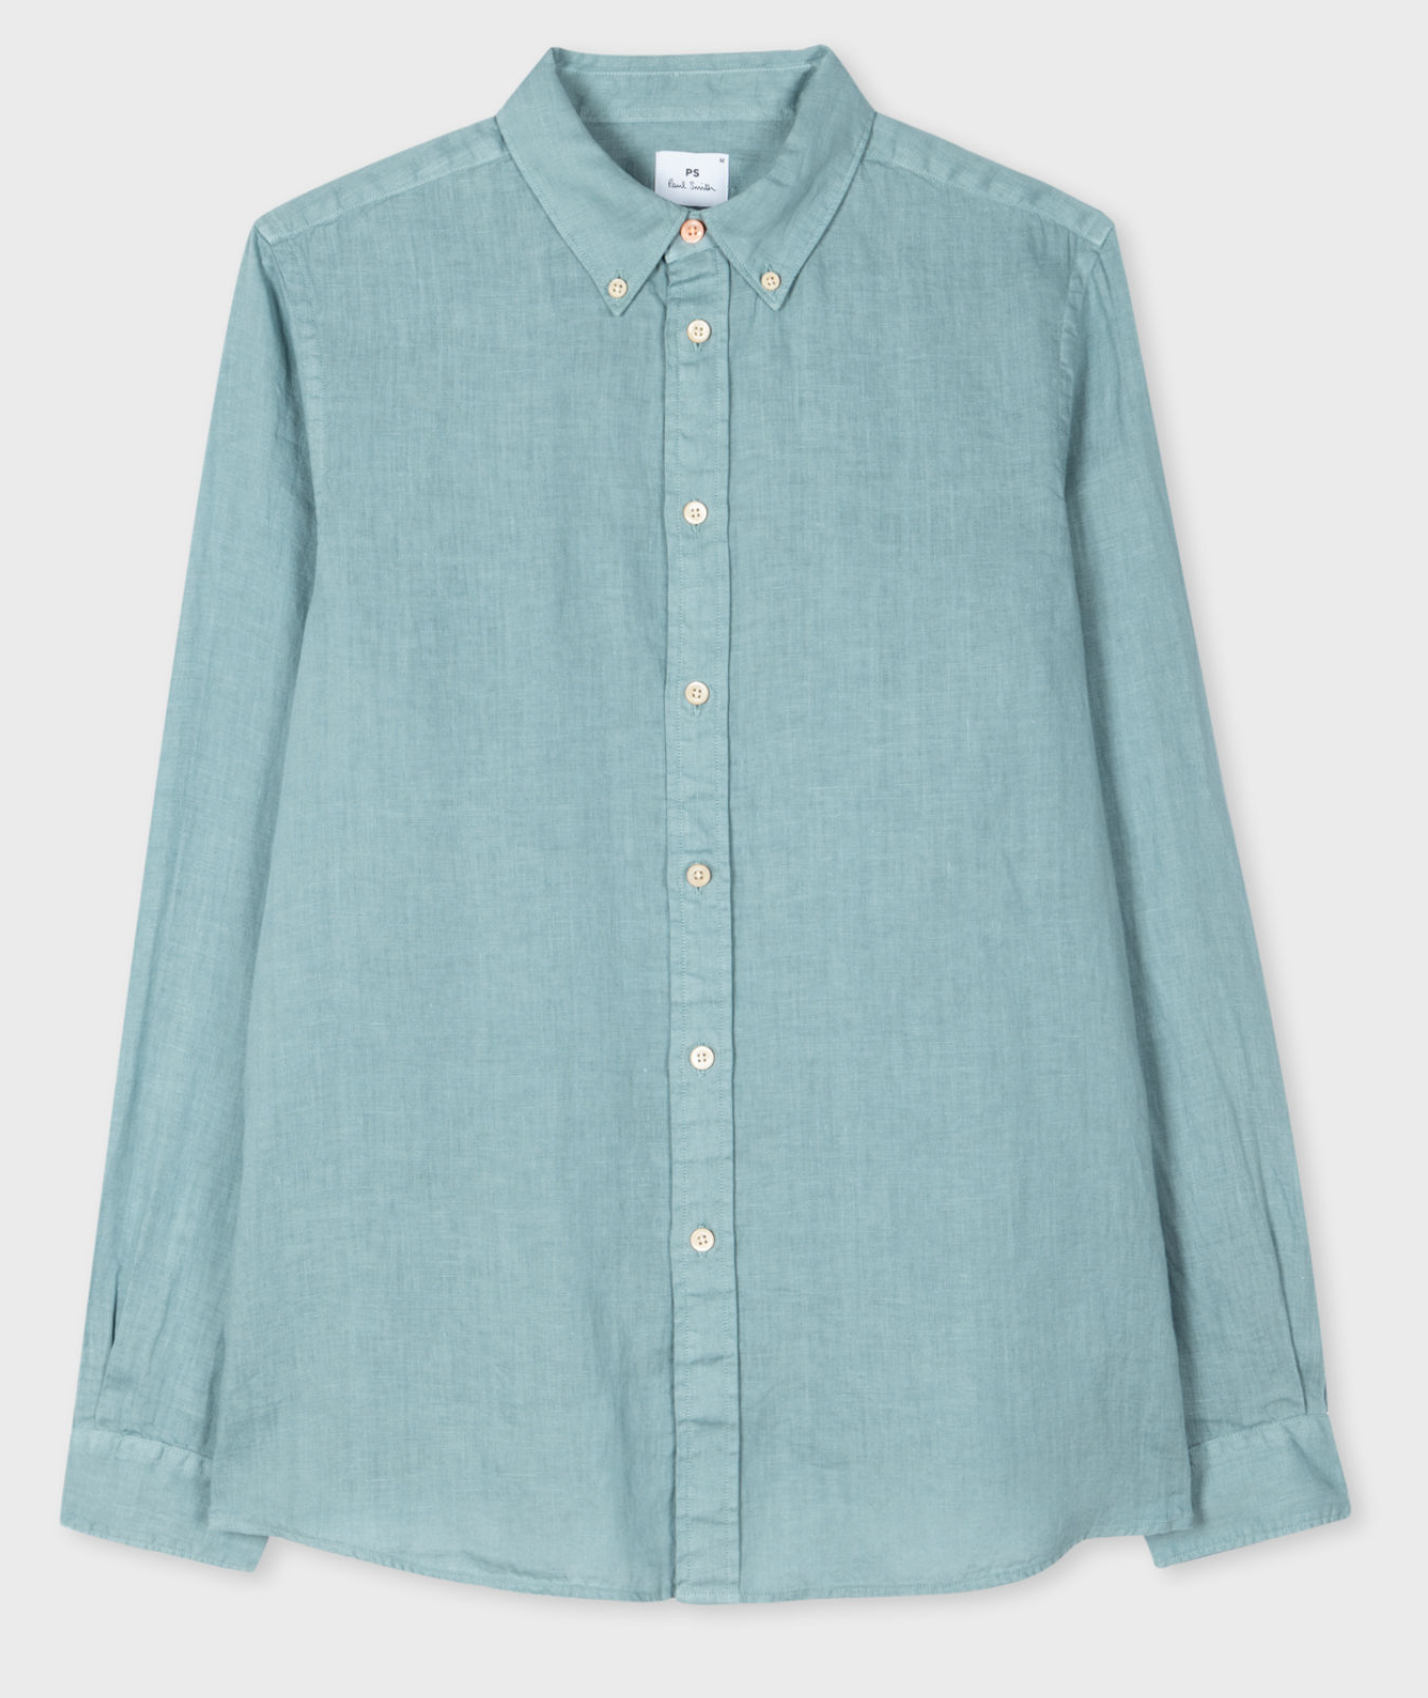 PS by Paul Smith Linen Shirt Teal